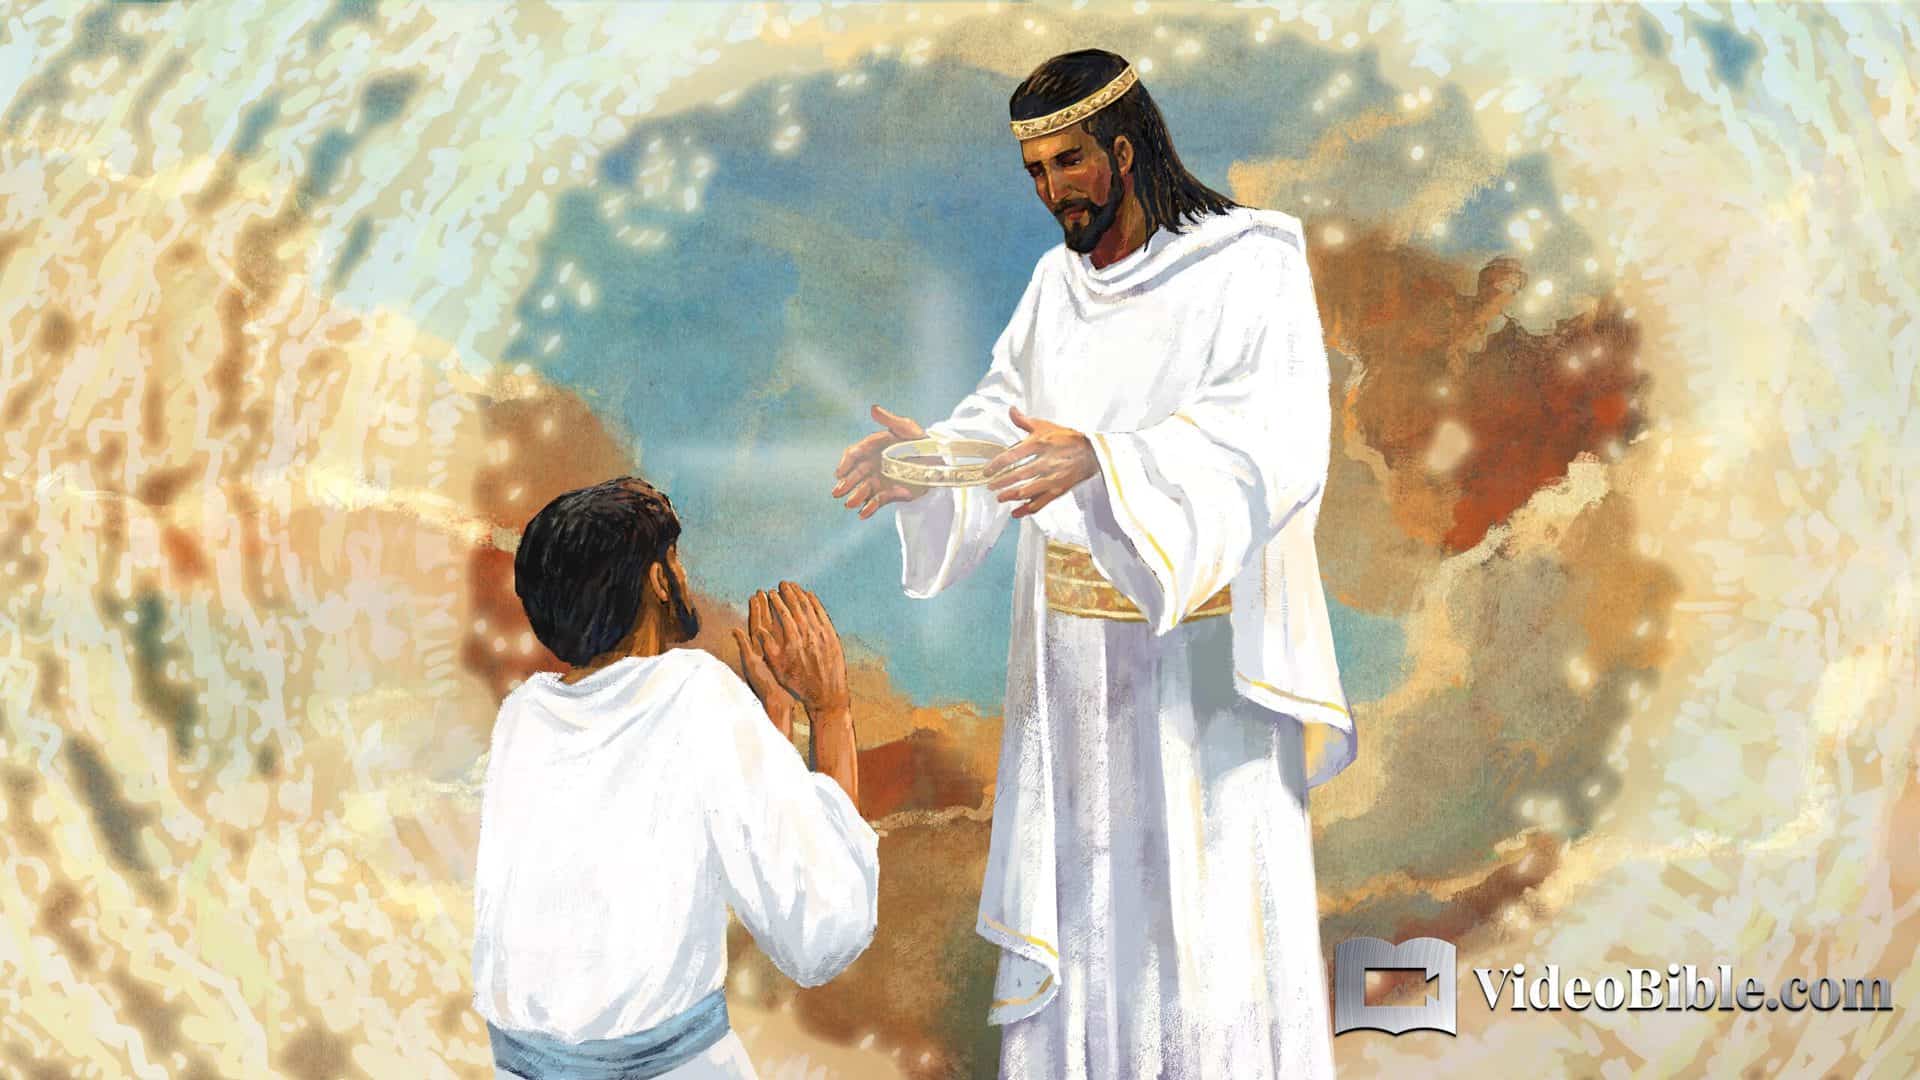 Jesus giving the crown of life to a man revelation